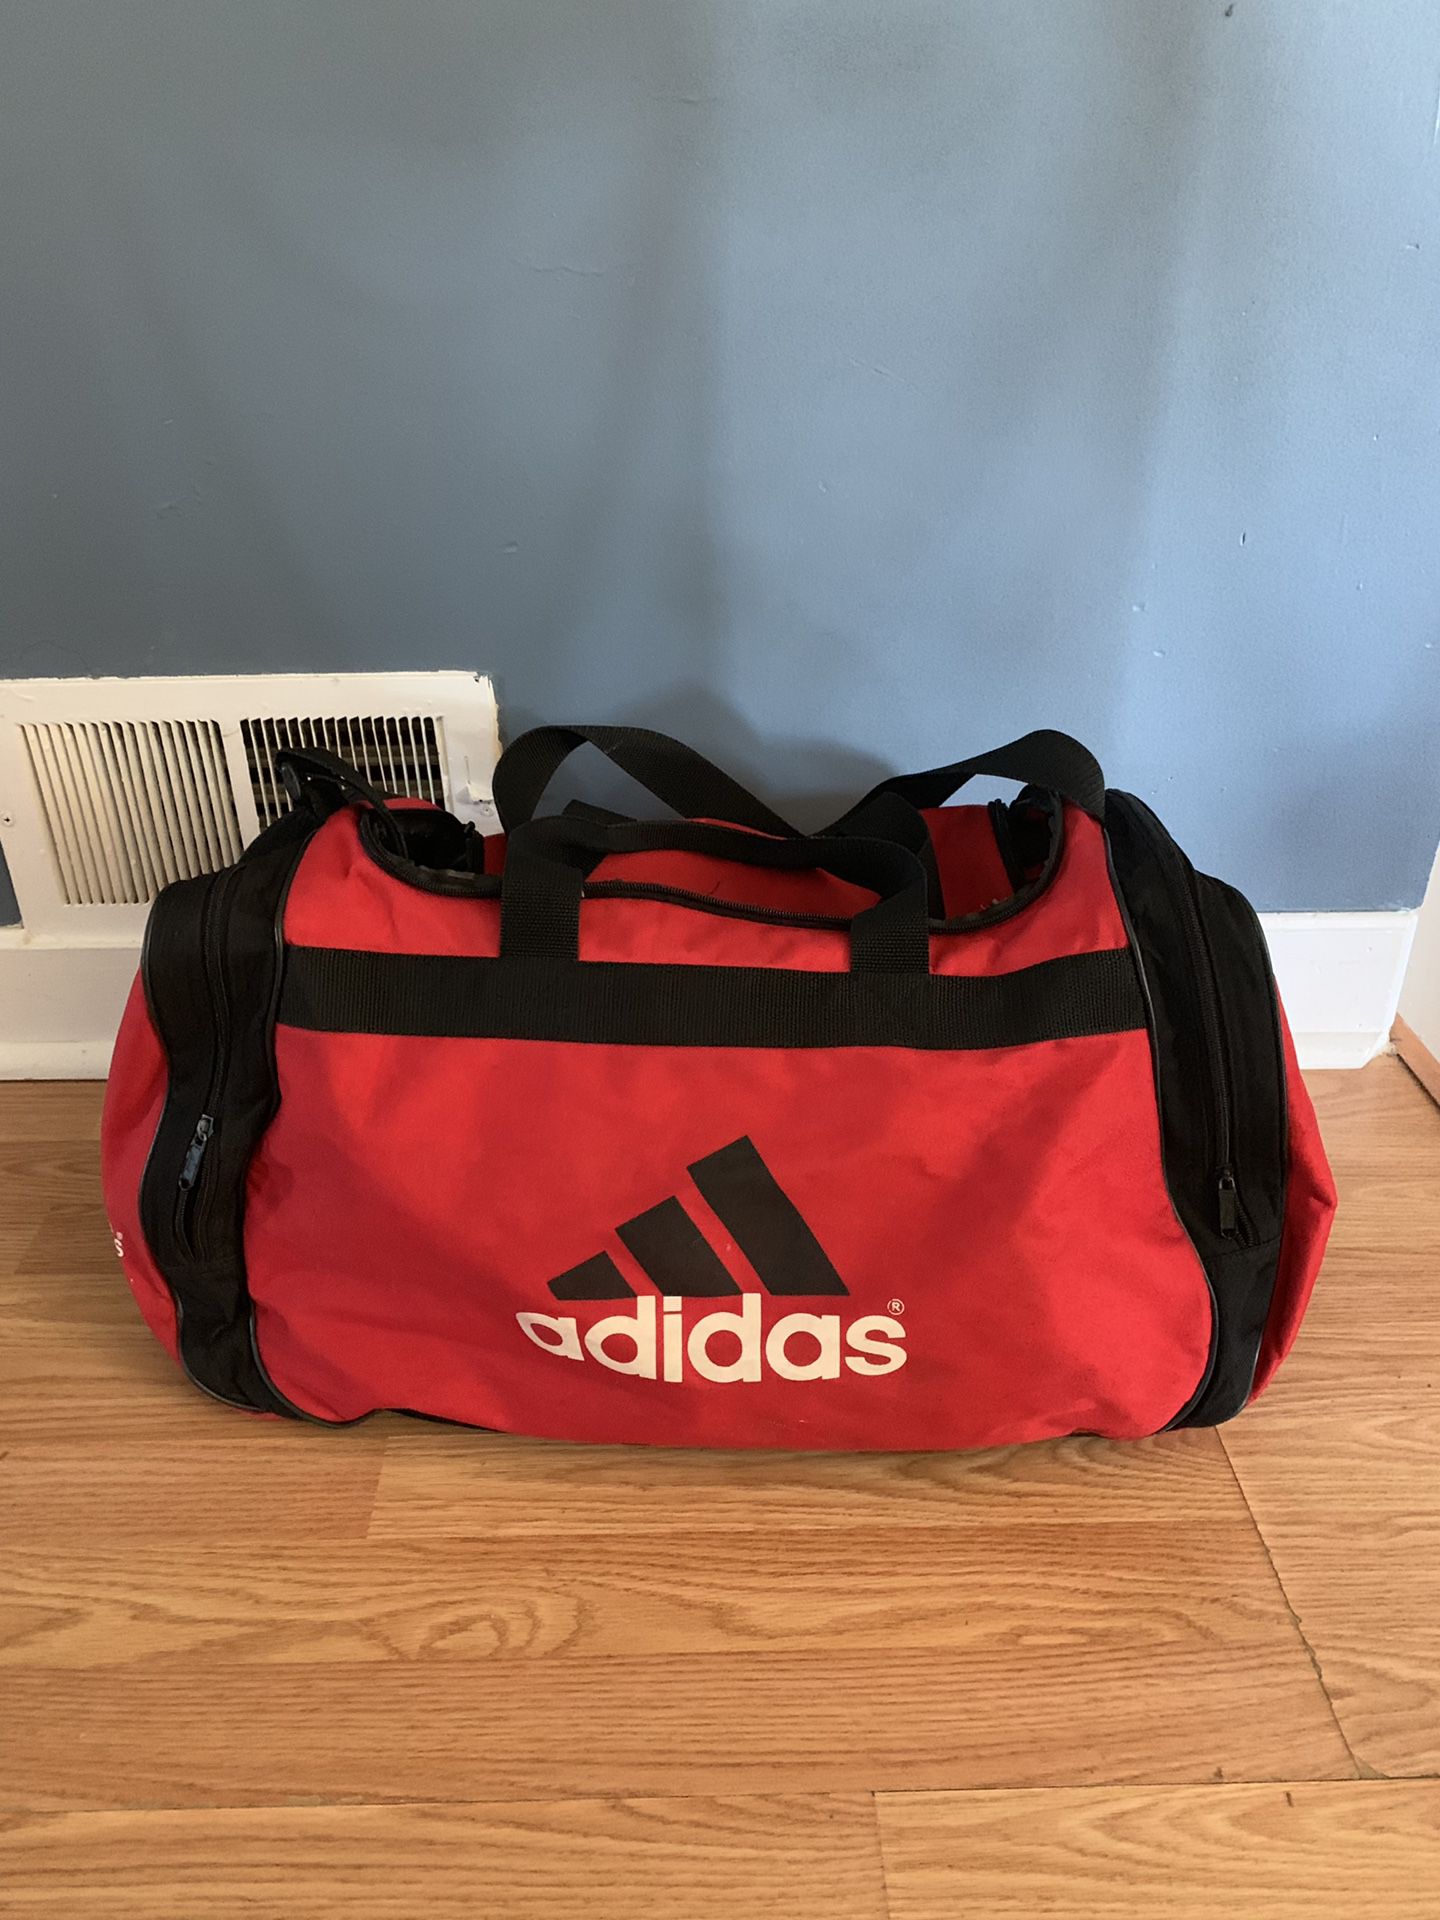 Adidas Duffle Gym Bag carry-on Suitcase